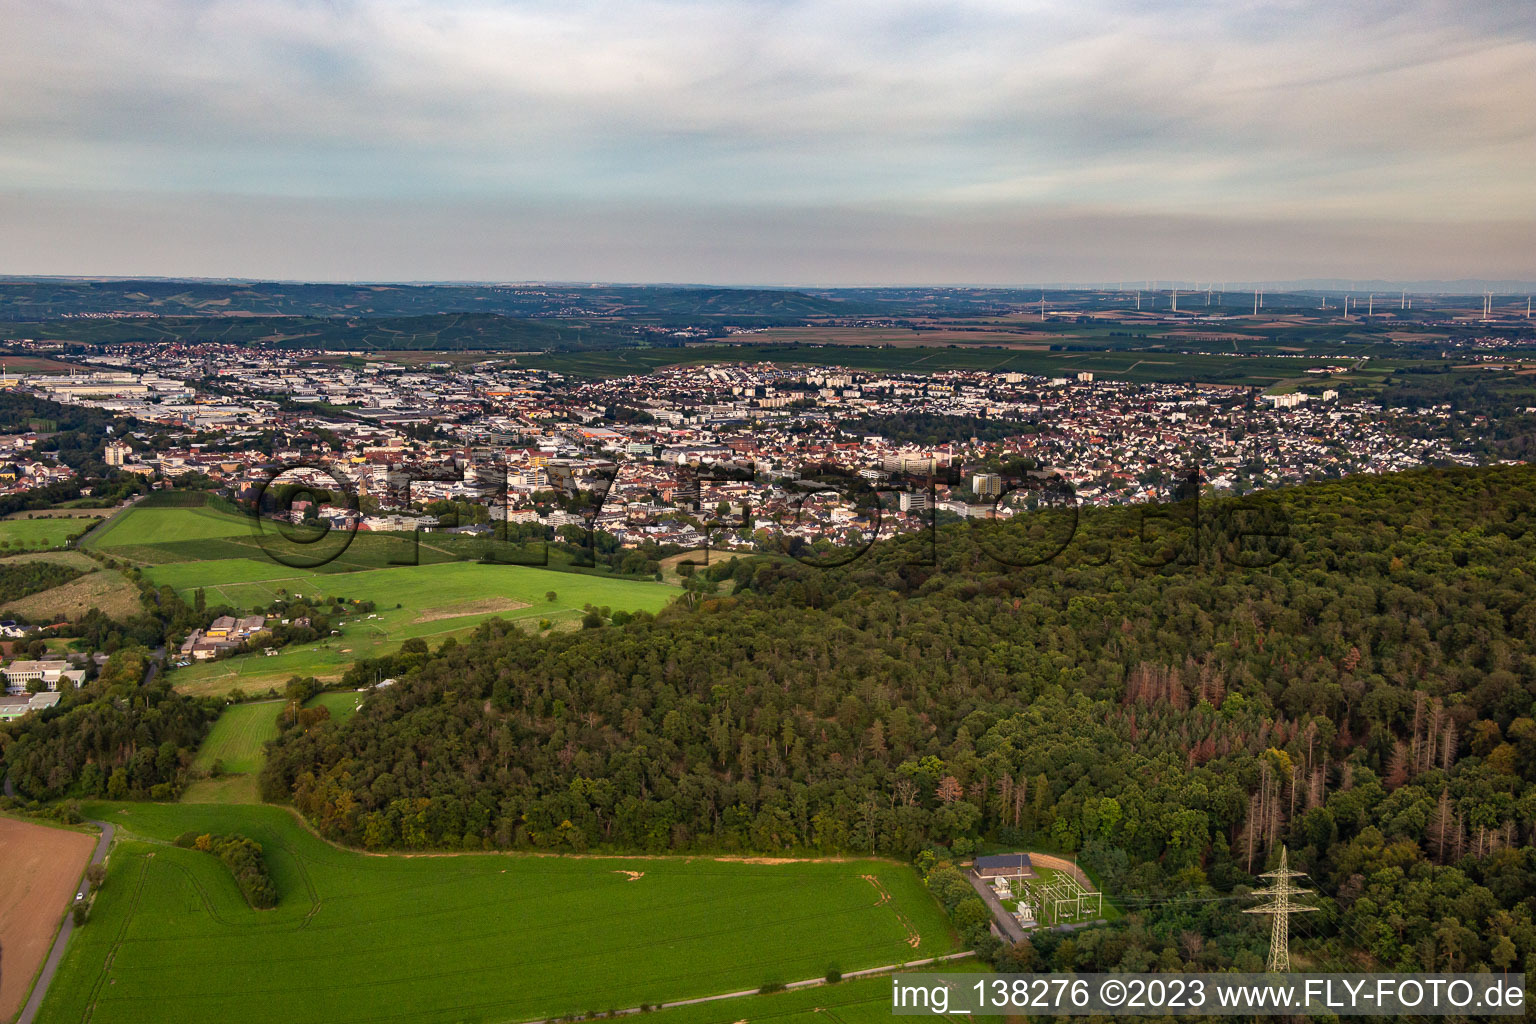 From the west in Bad Kreuznach in the state Rhineland-Palatinate, Germany